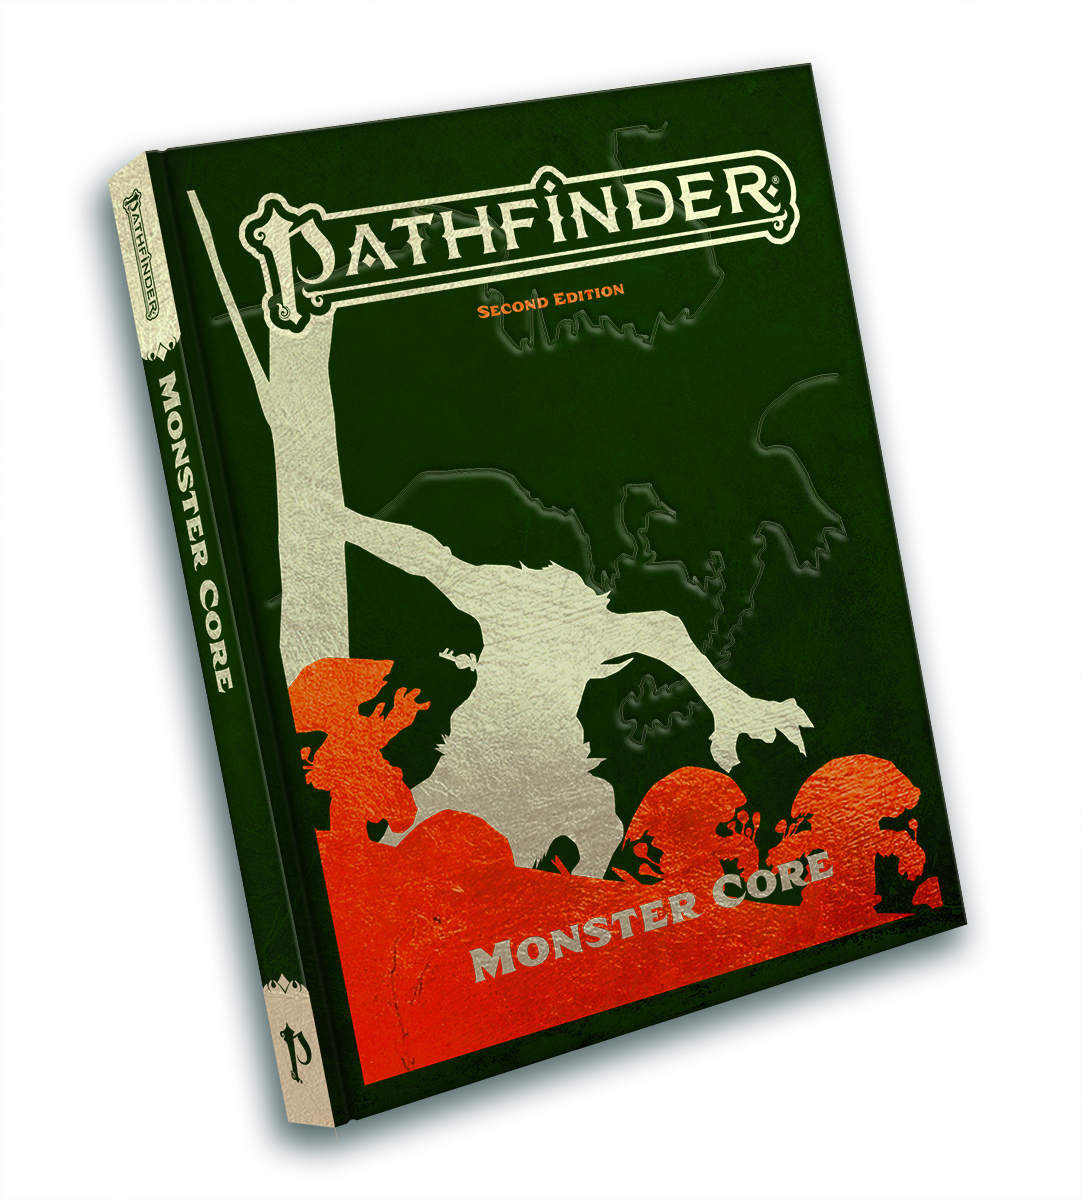 PATHFINDER 2E REMASTERED SPECIAL EDITION: MONSTER CORE